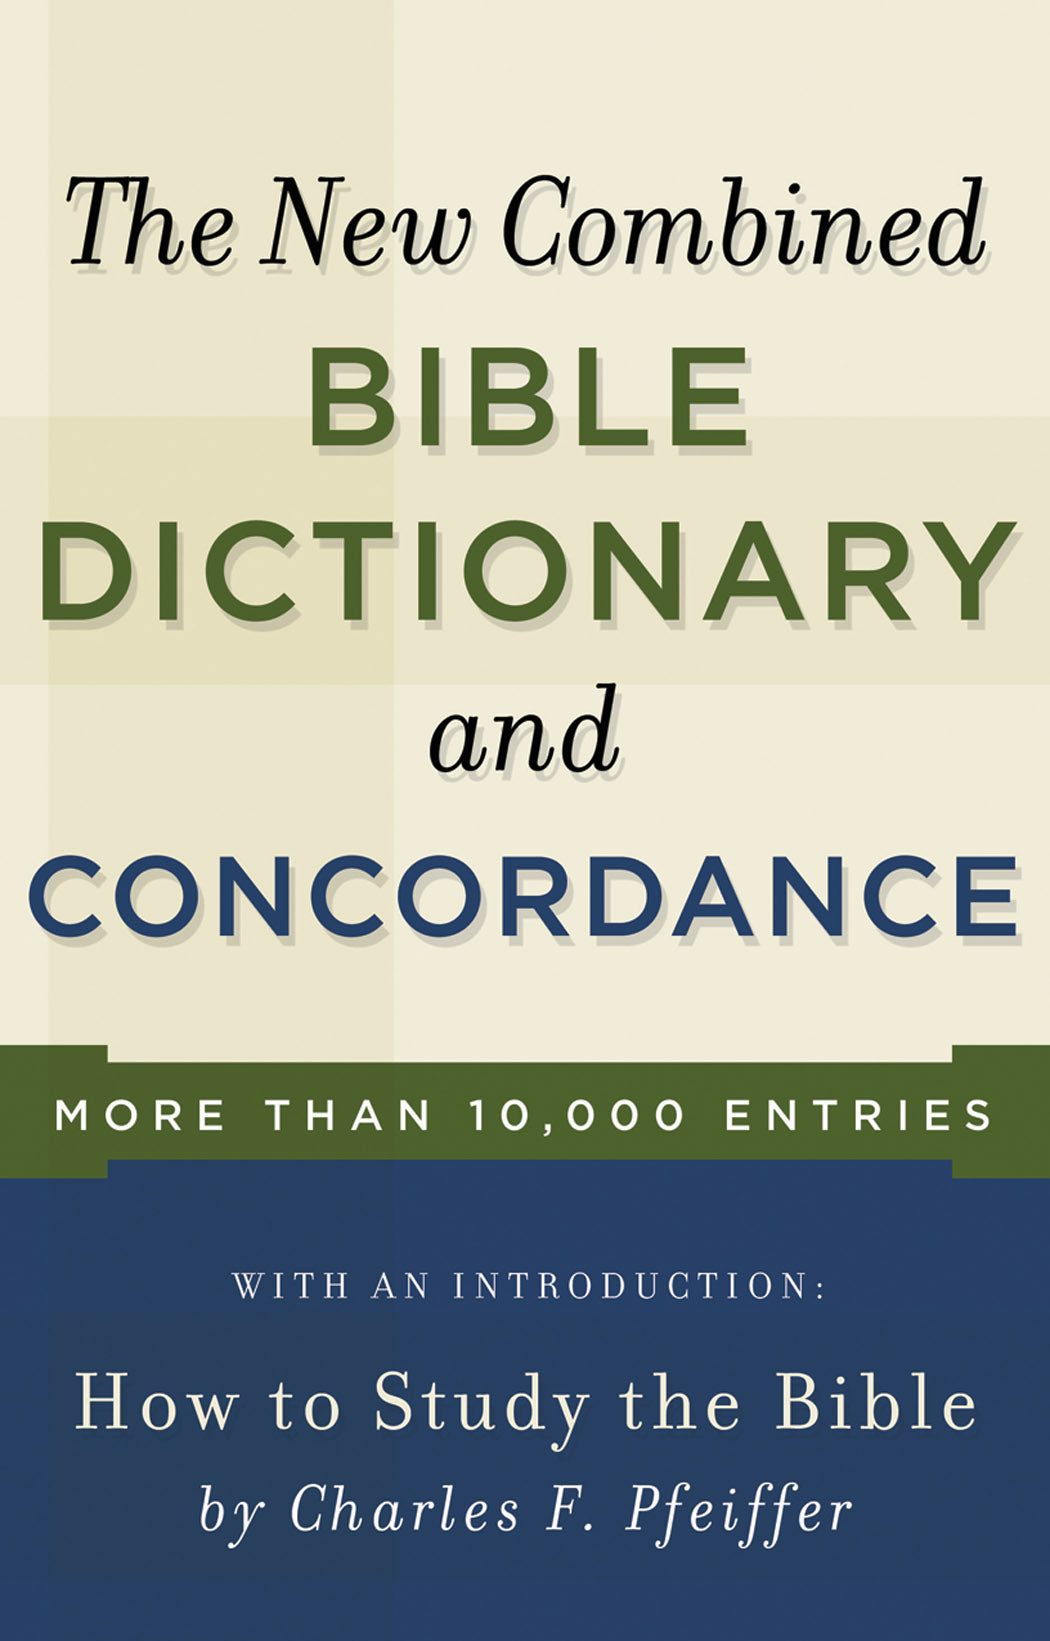 Image of The New Combined Bible Dictionary and Concordance other